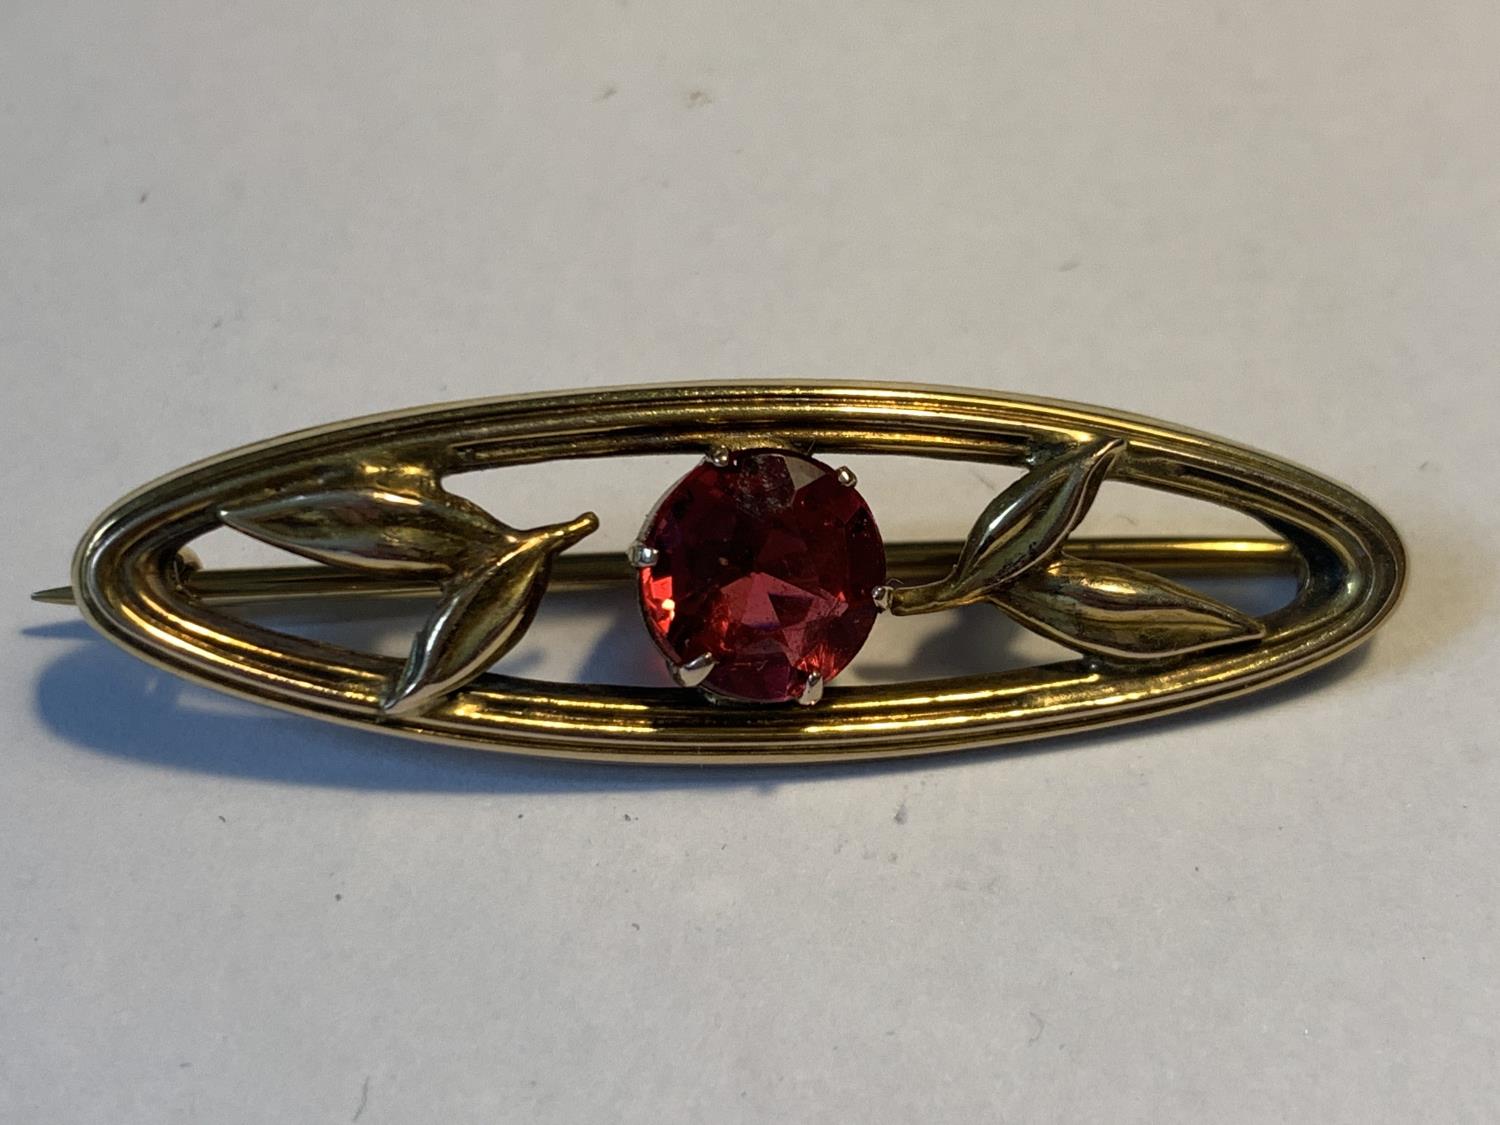 A 9 CARAT GOLD BROOCH WITH CENTRE RED STONE GROSS WEIGHT 2.64 GRAMS IN A PRESENTATION BOX